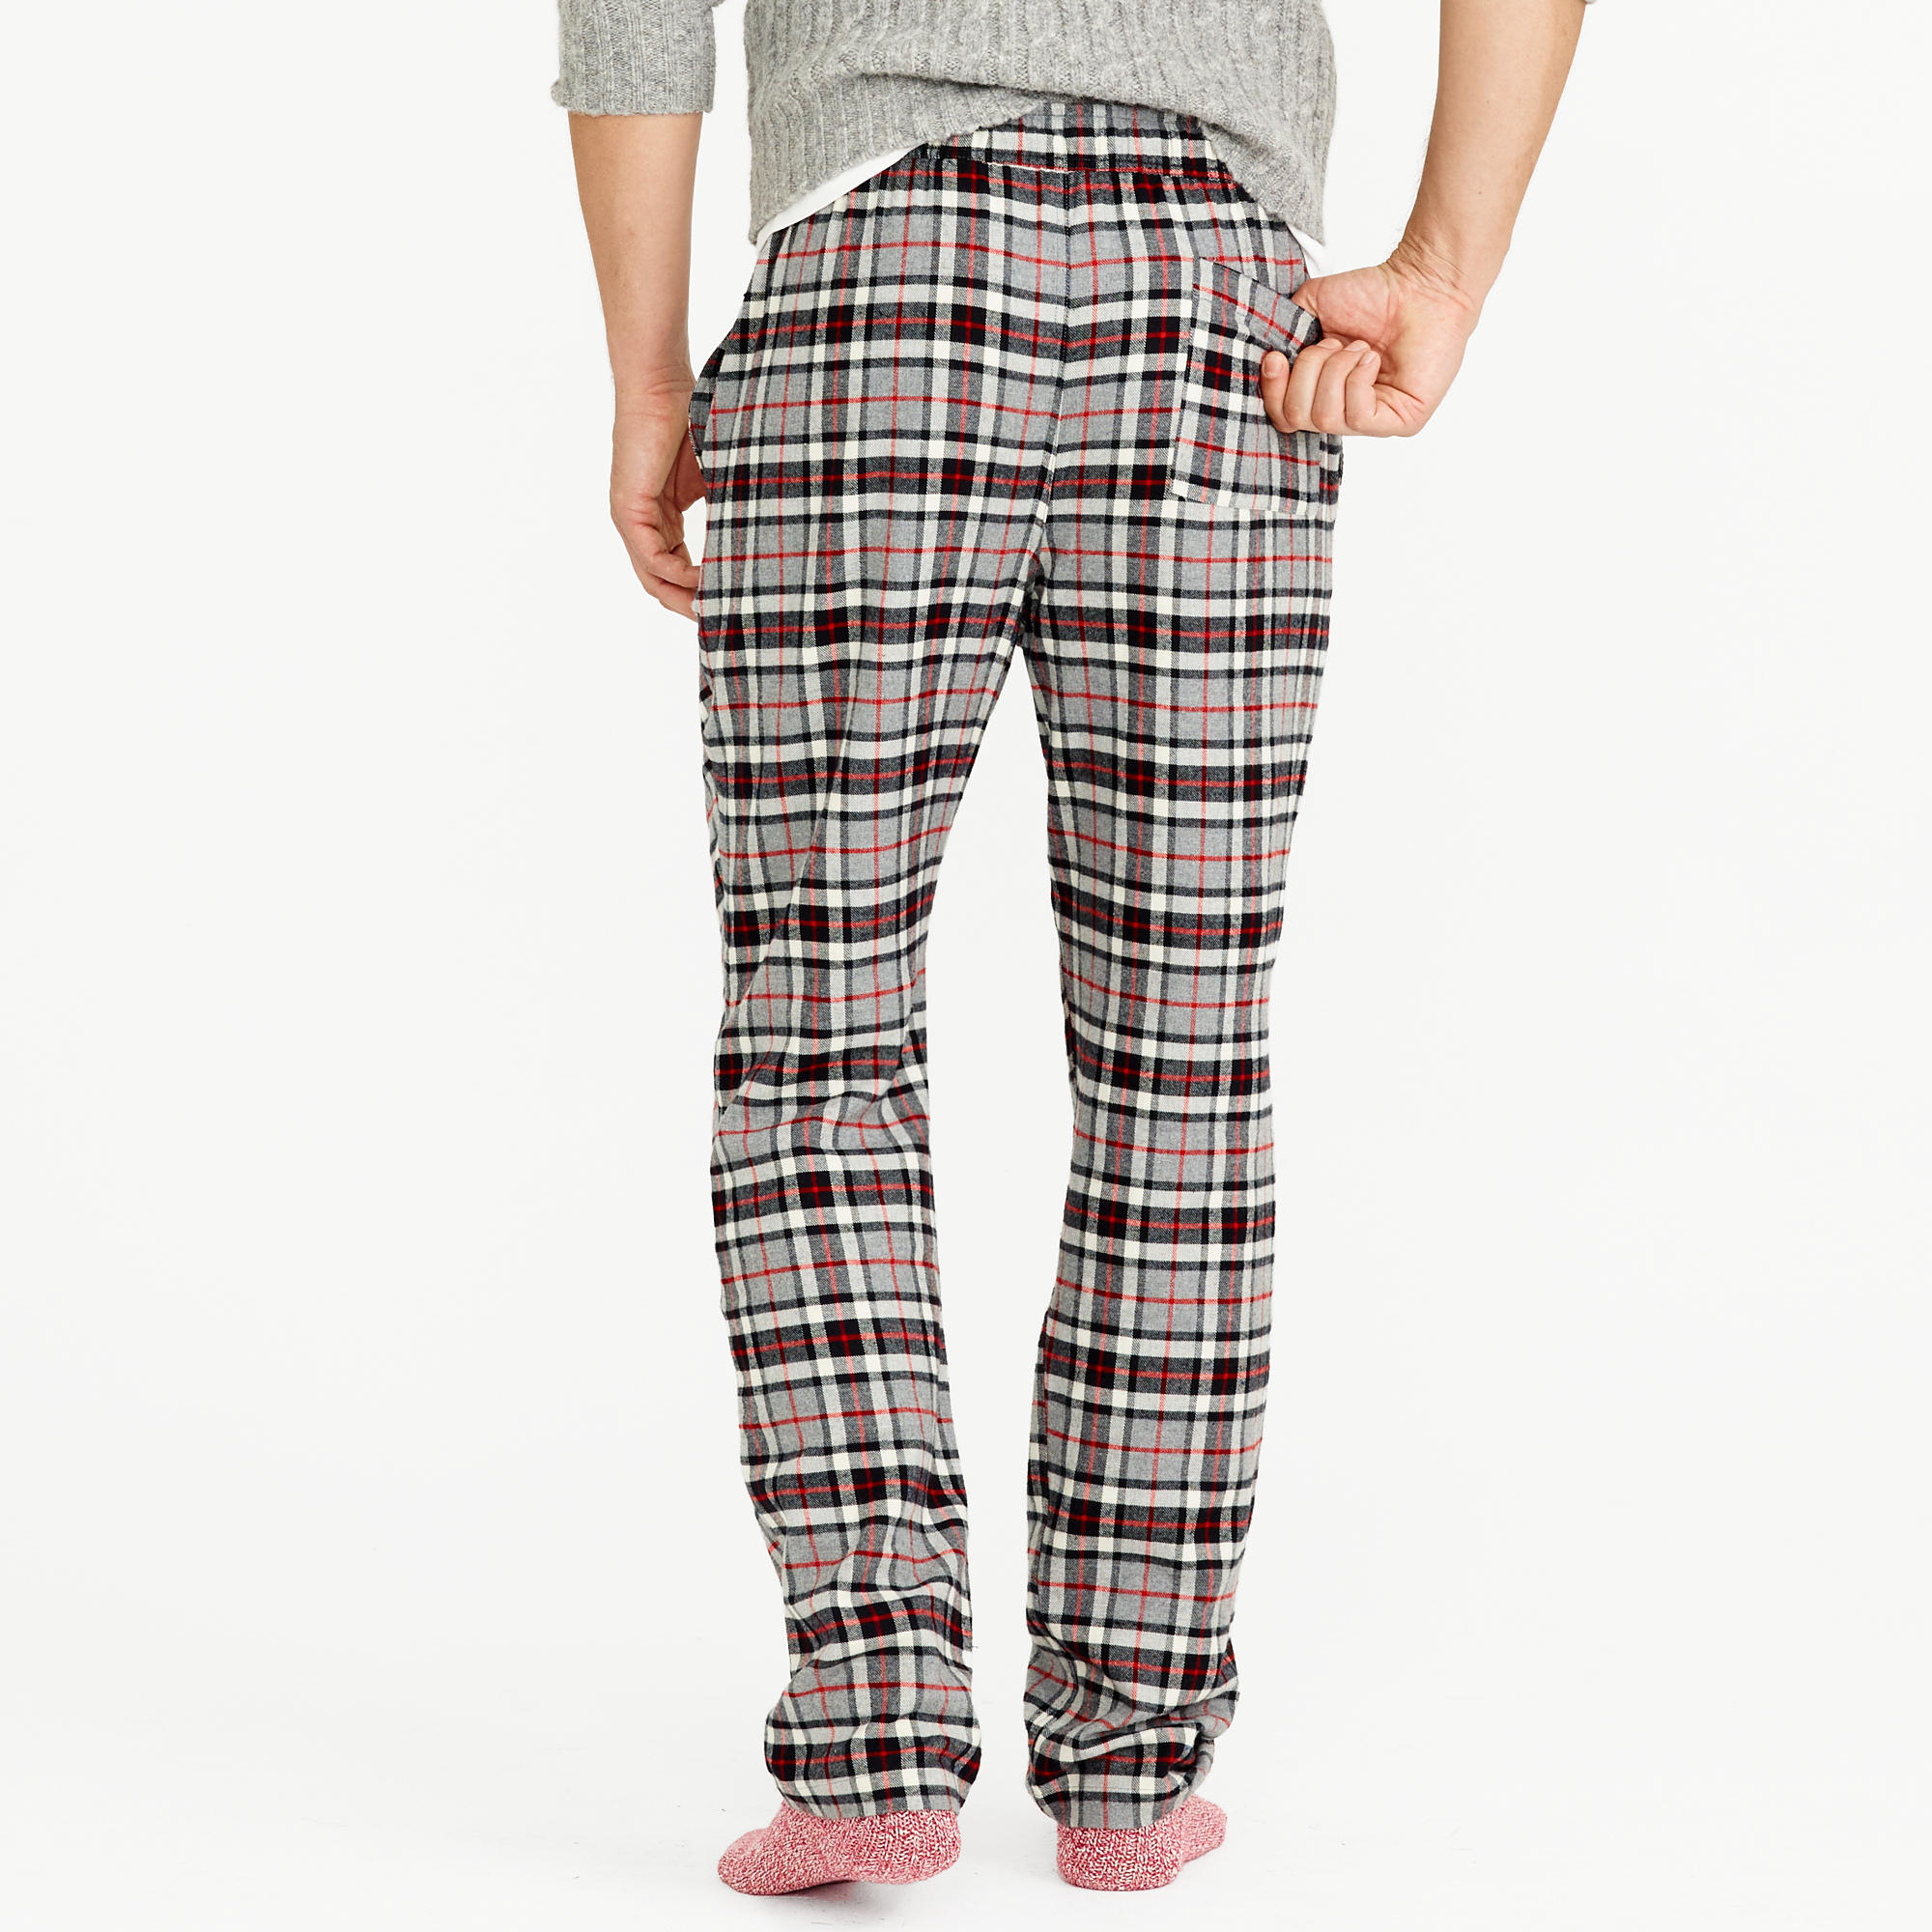 Lyst - J.Crew Flannel Pajama Pant In Grey Plaid in Gray for Men